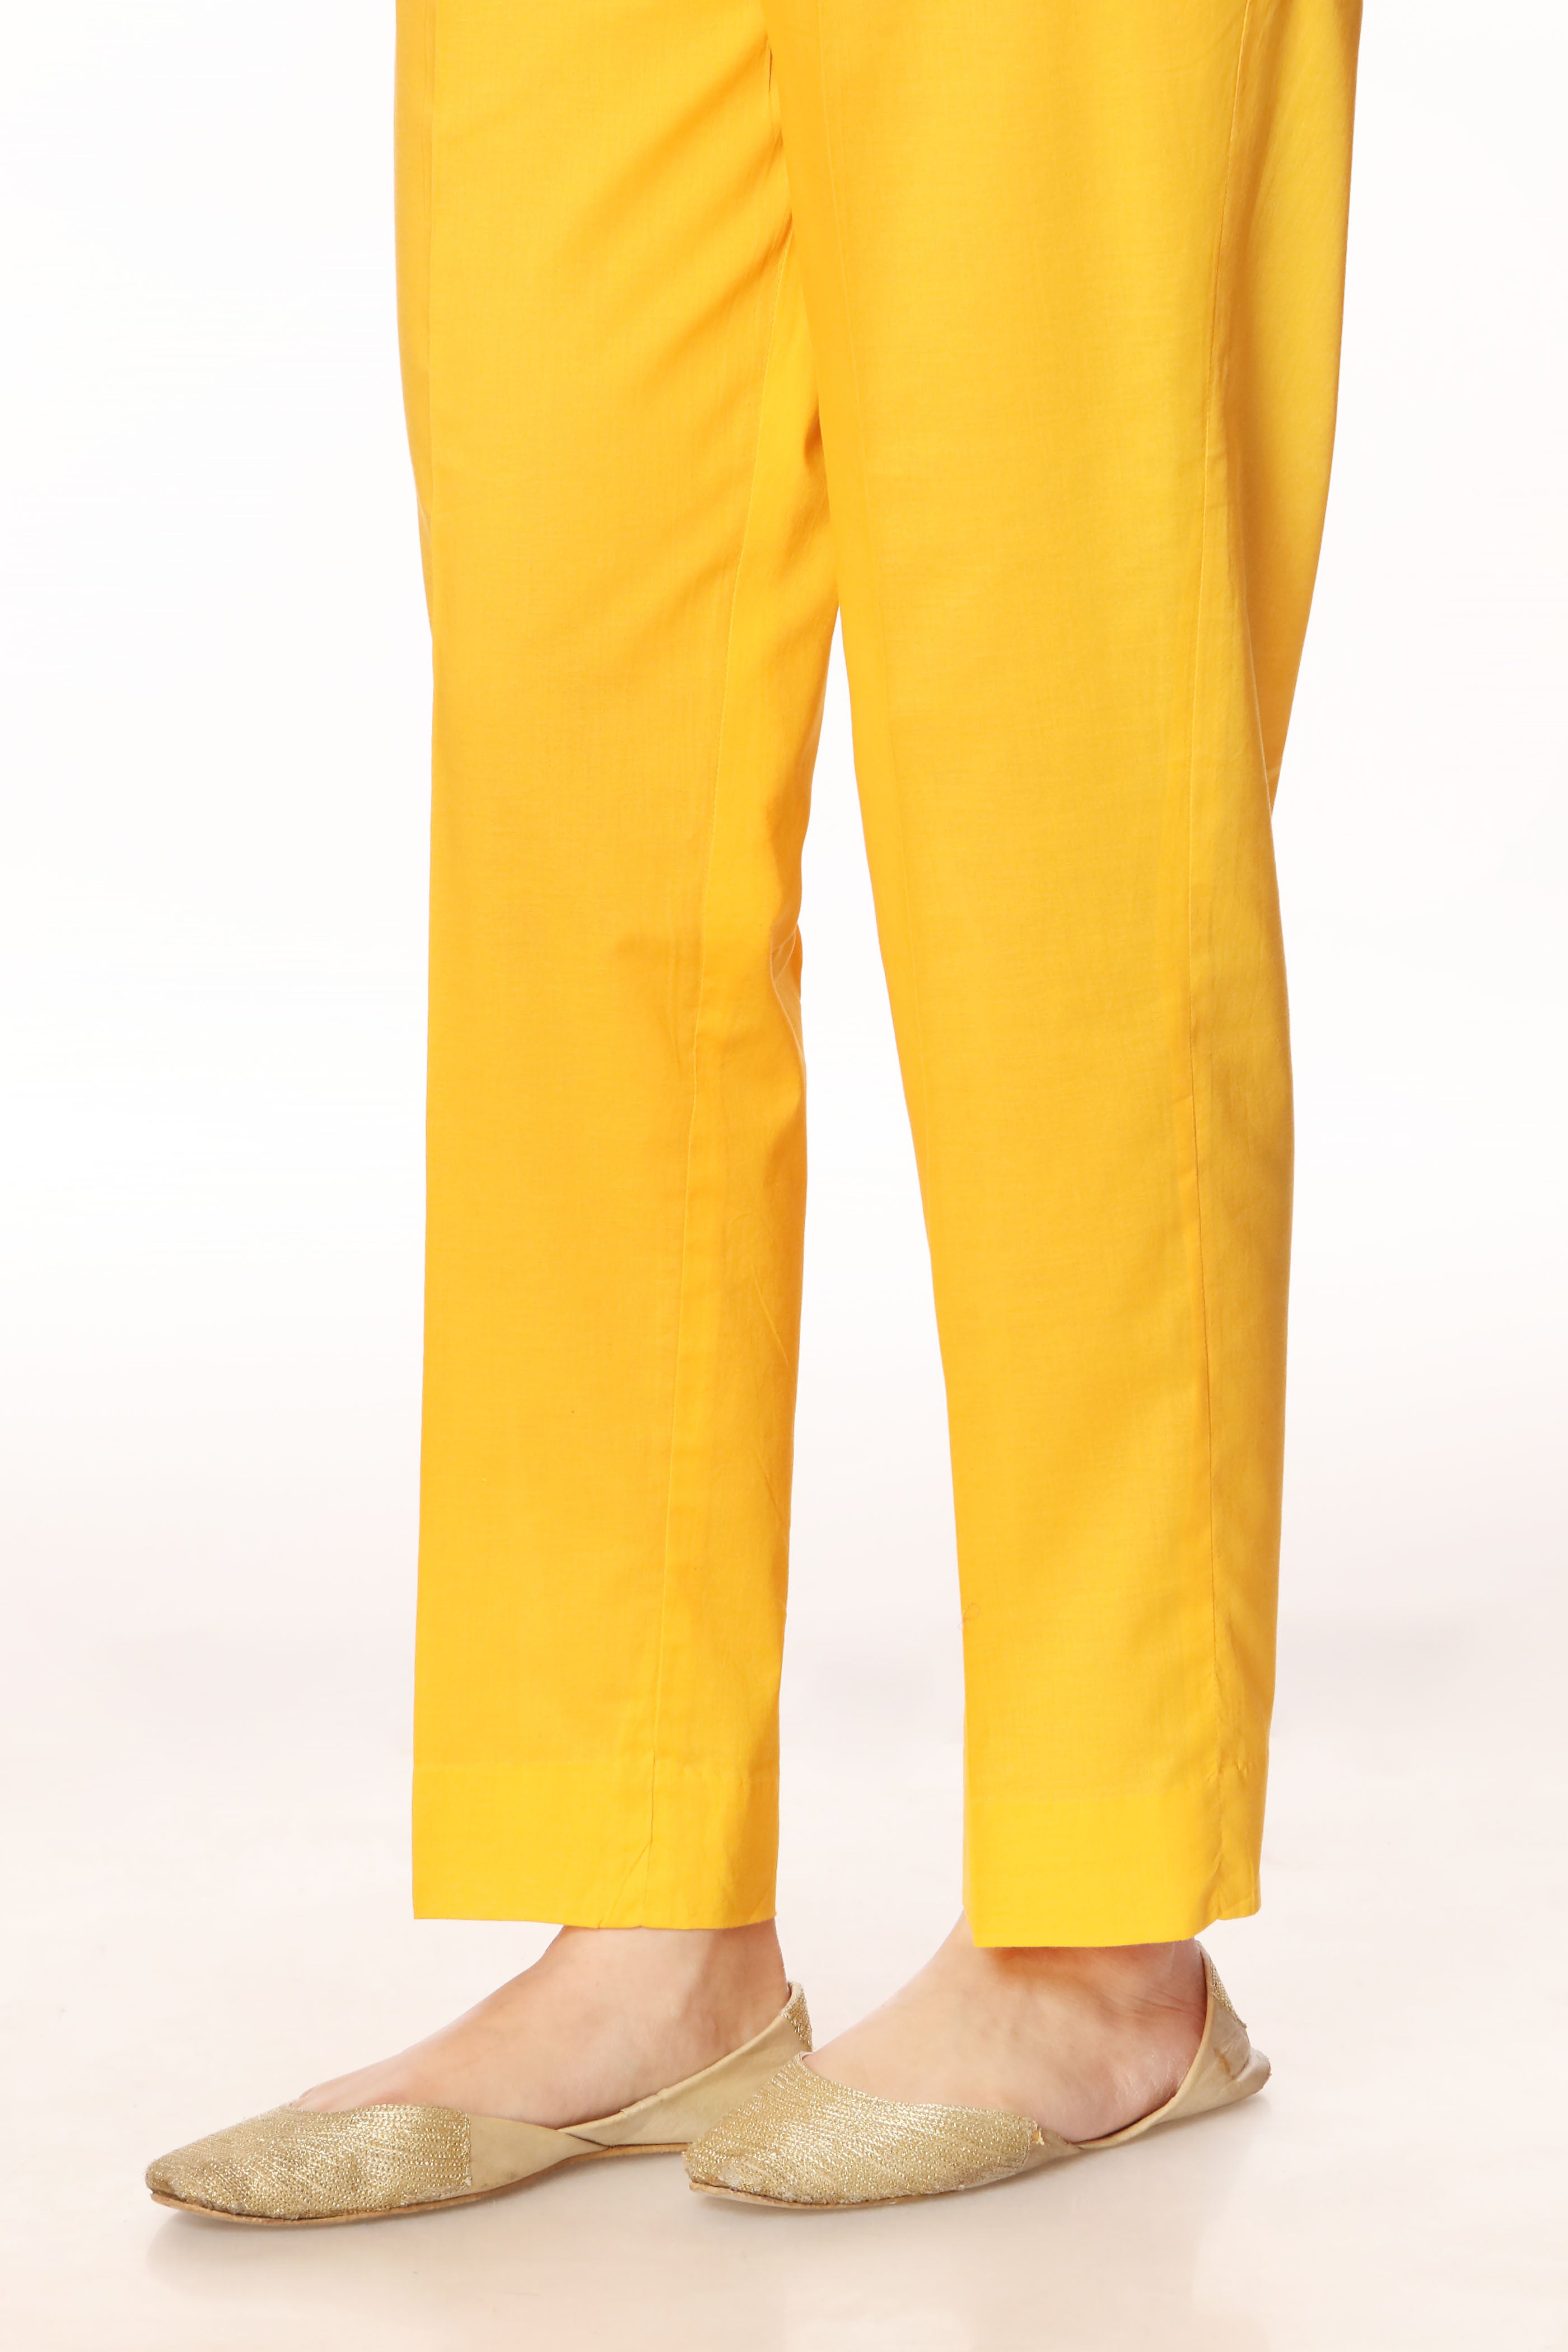 Mustard Trouser in Mustard coloured Printed Lawn fabric 2